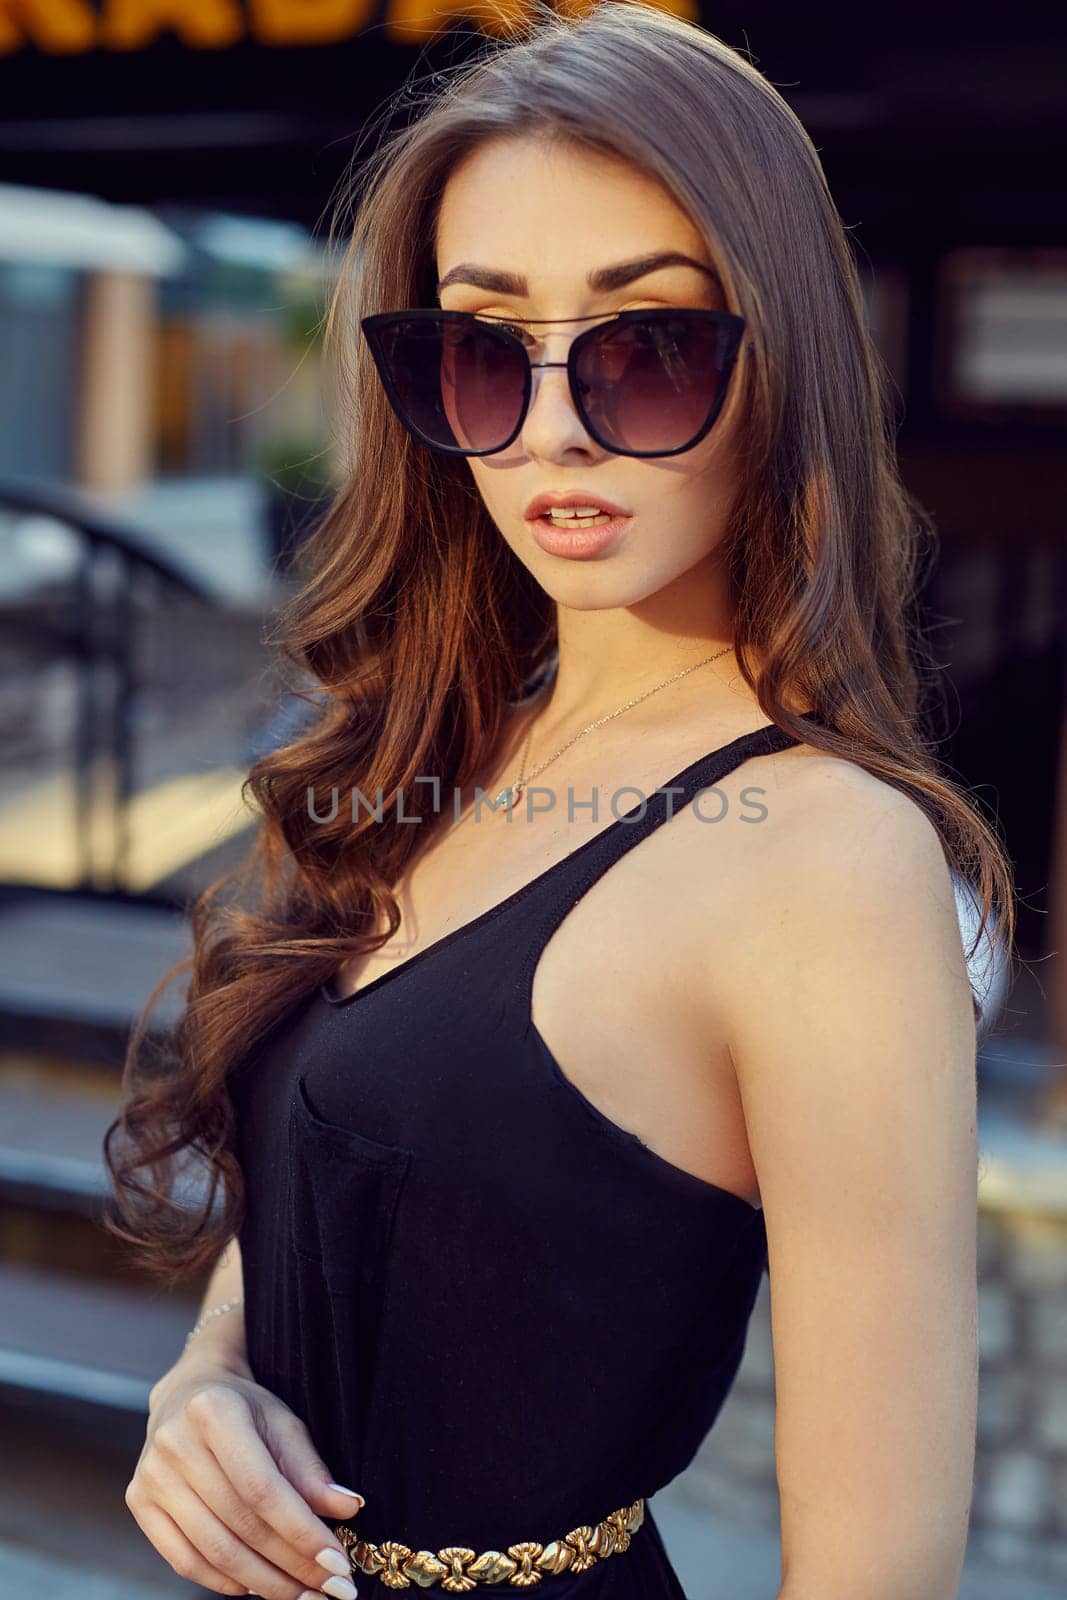 Fashion style portrait of young beautiful elegant woman in black dress, sunglasses, with long dark hair walking at city streets.